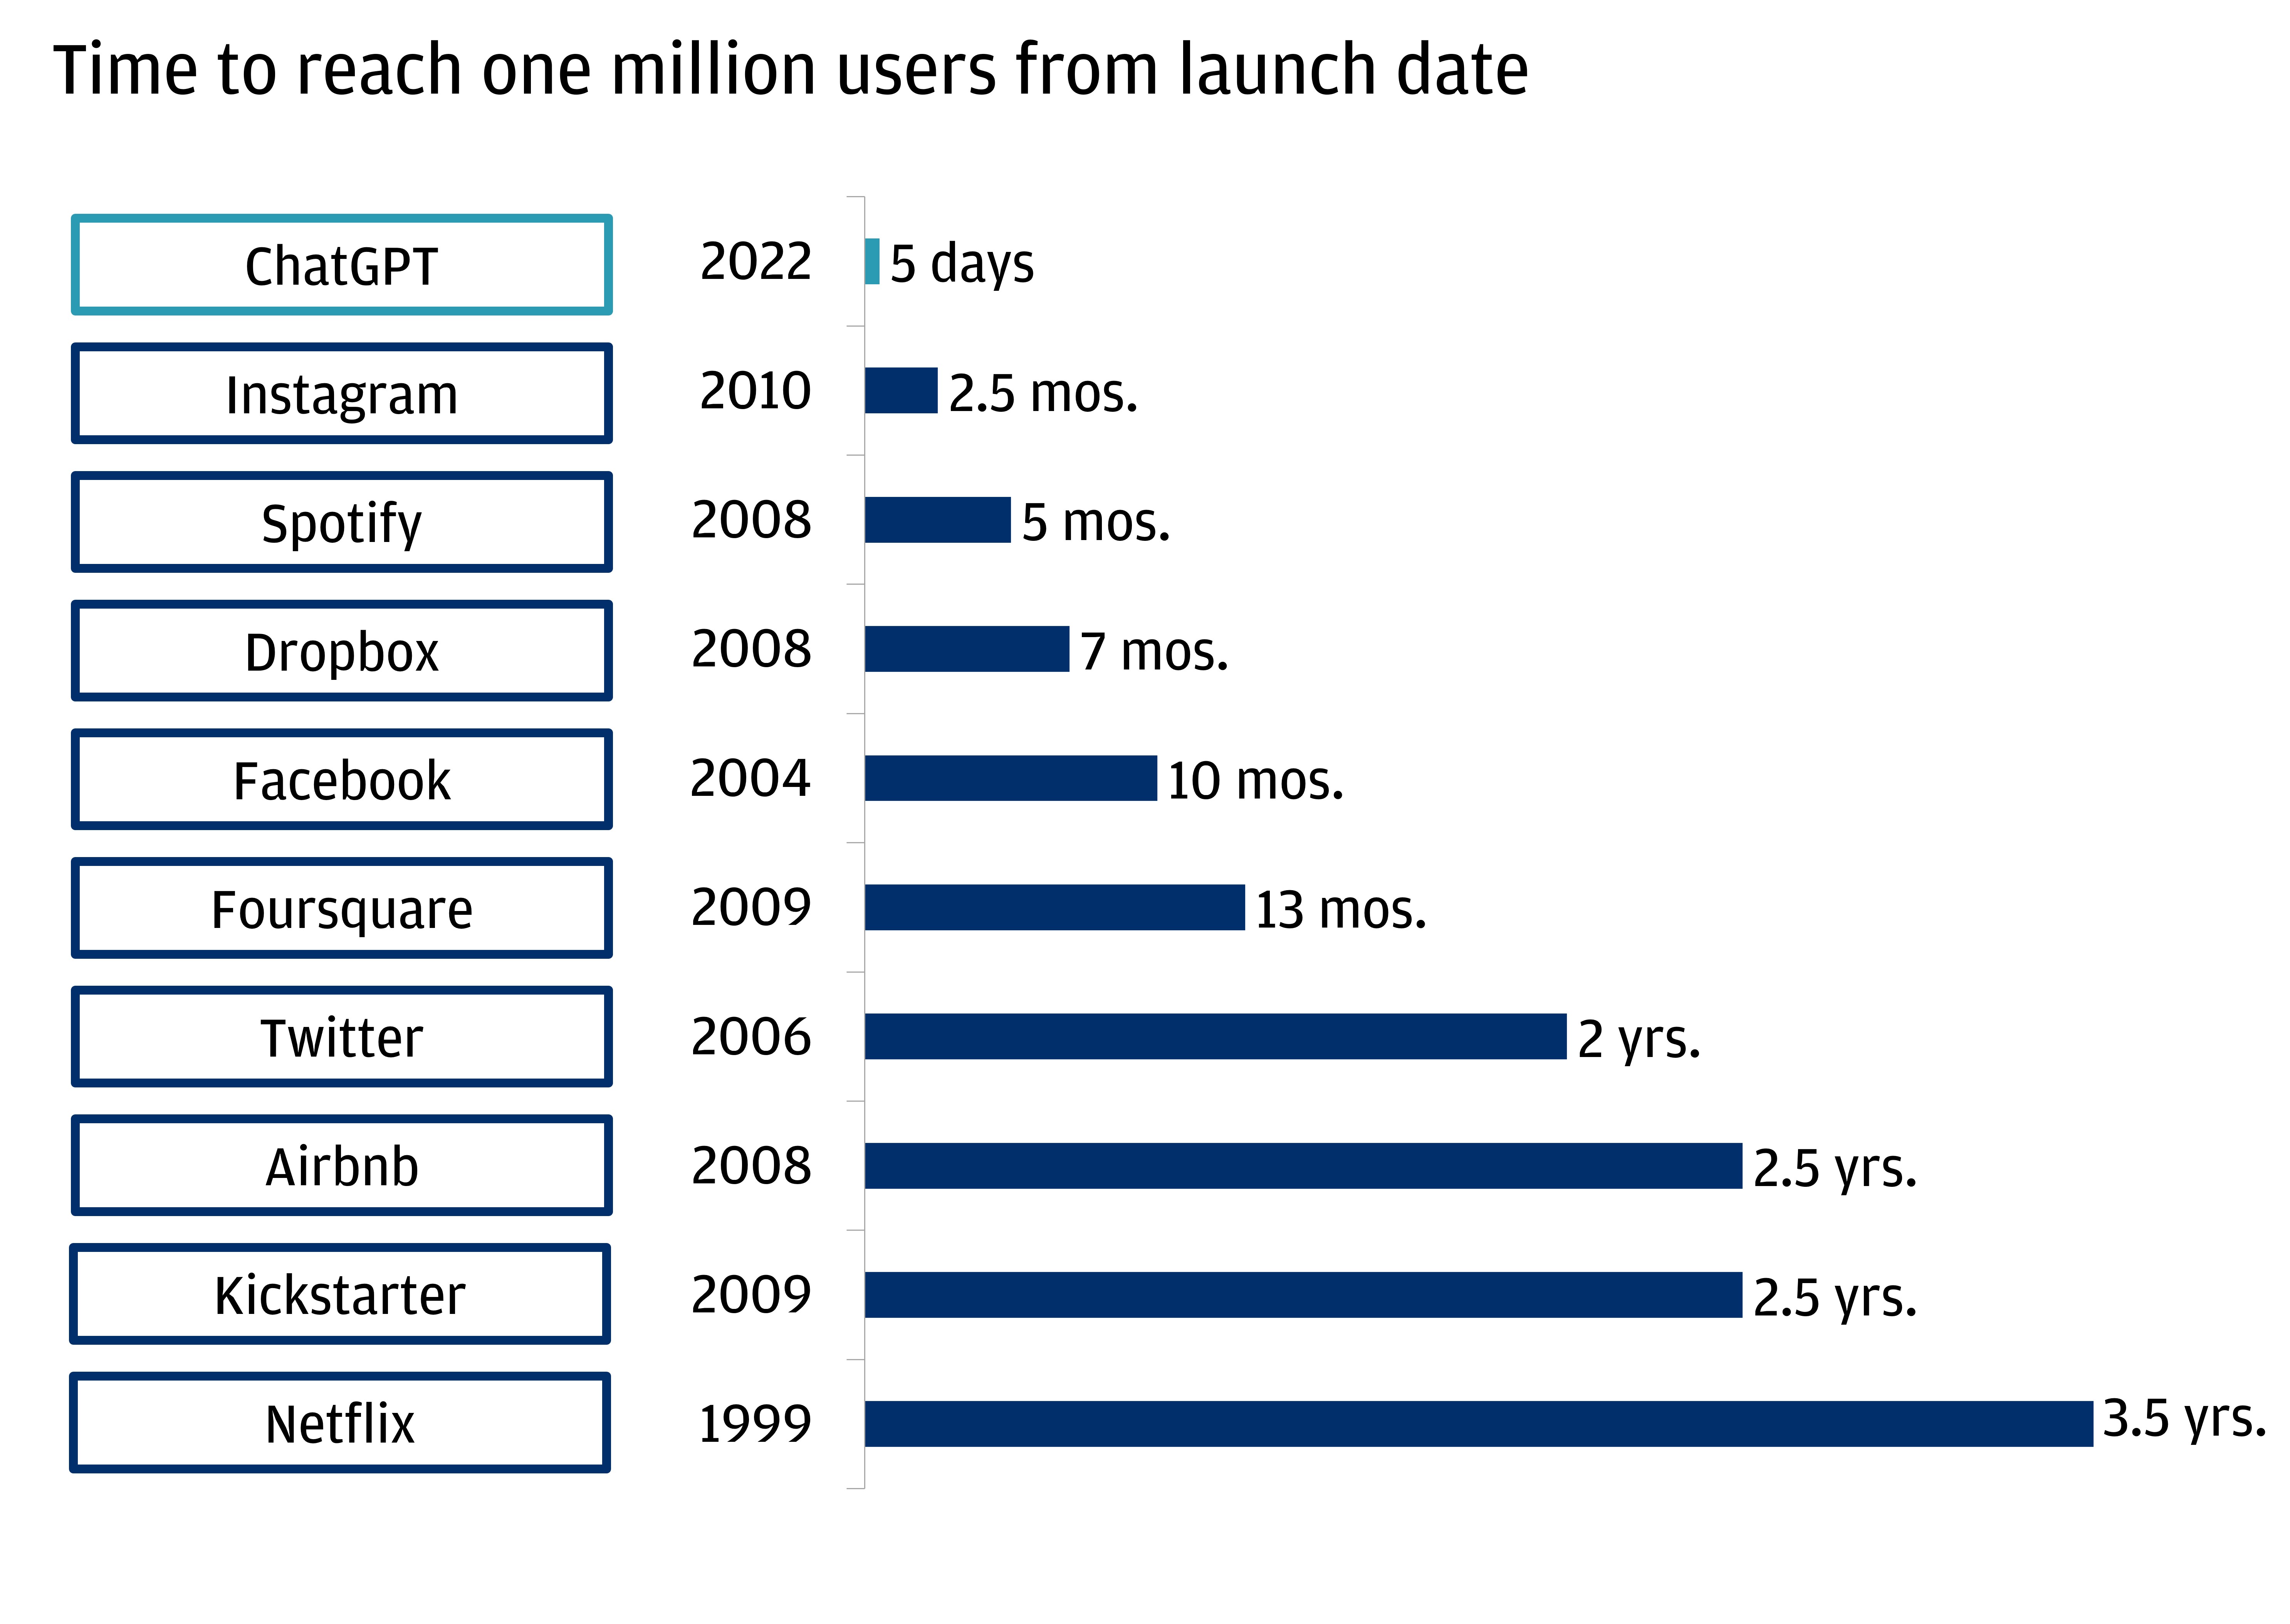 The chart describes the time each application took to reach one million users from launch date.